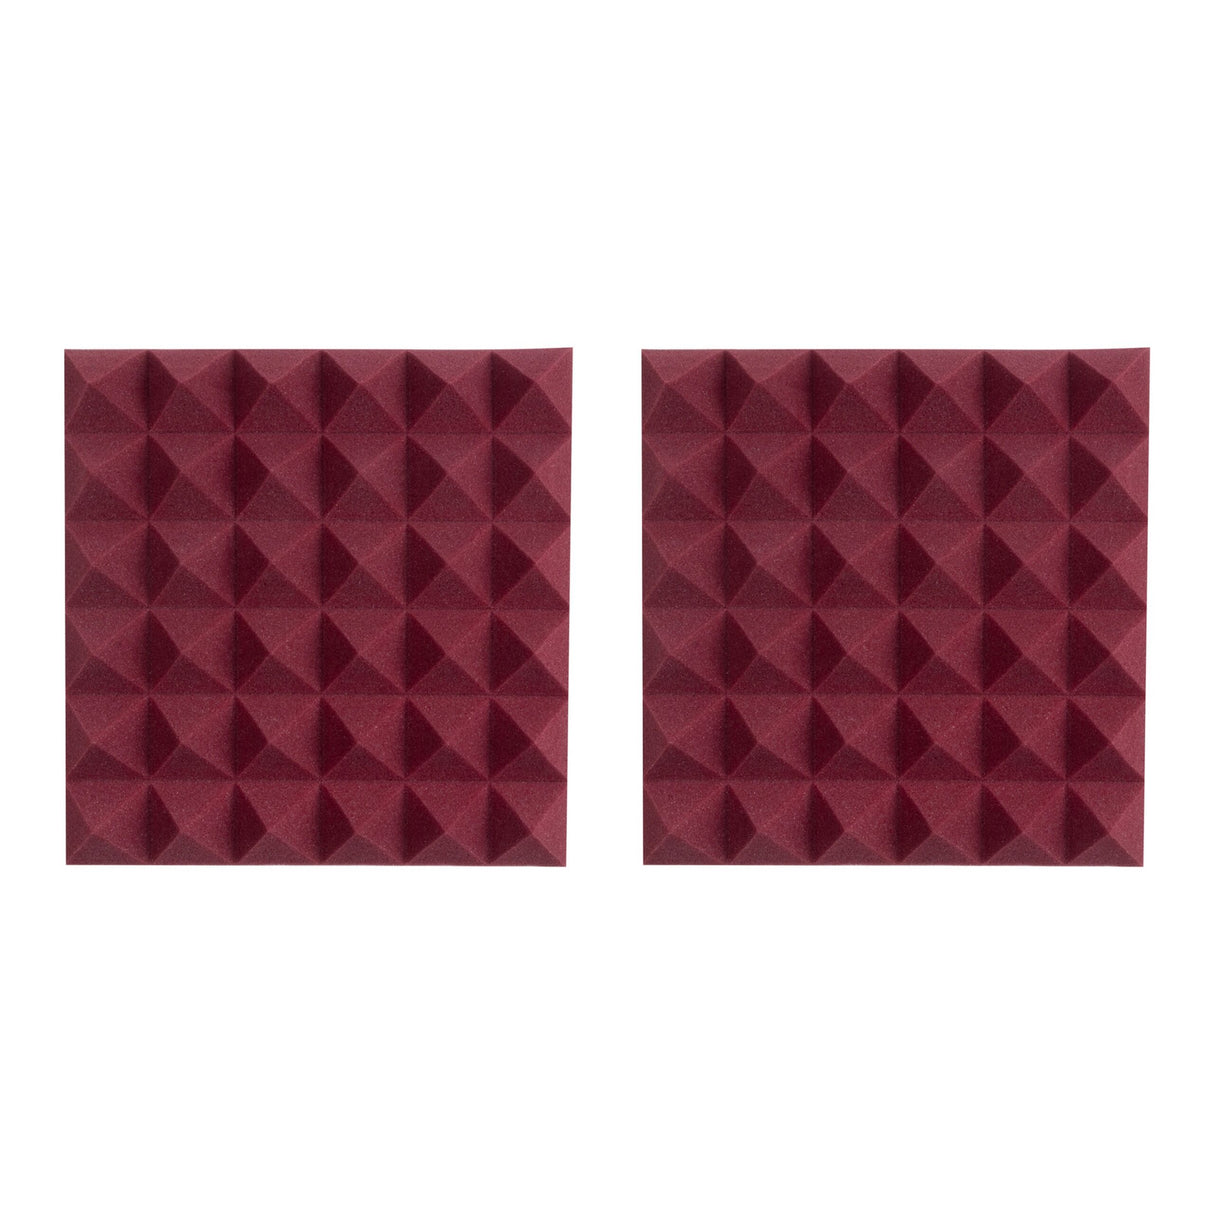 Gator GFW-ACPNL1212PBDY-2PK 2 Pack of Burgundy Acoustic Pyramid Panel, 12 x 12 Inches